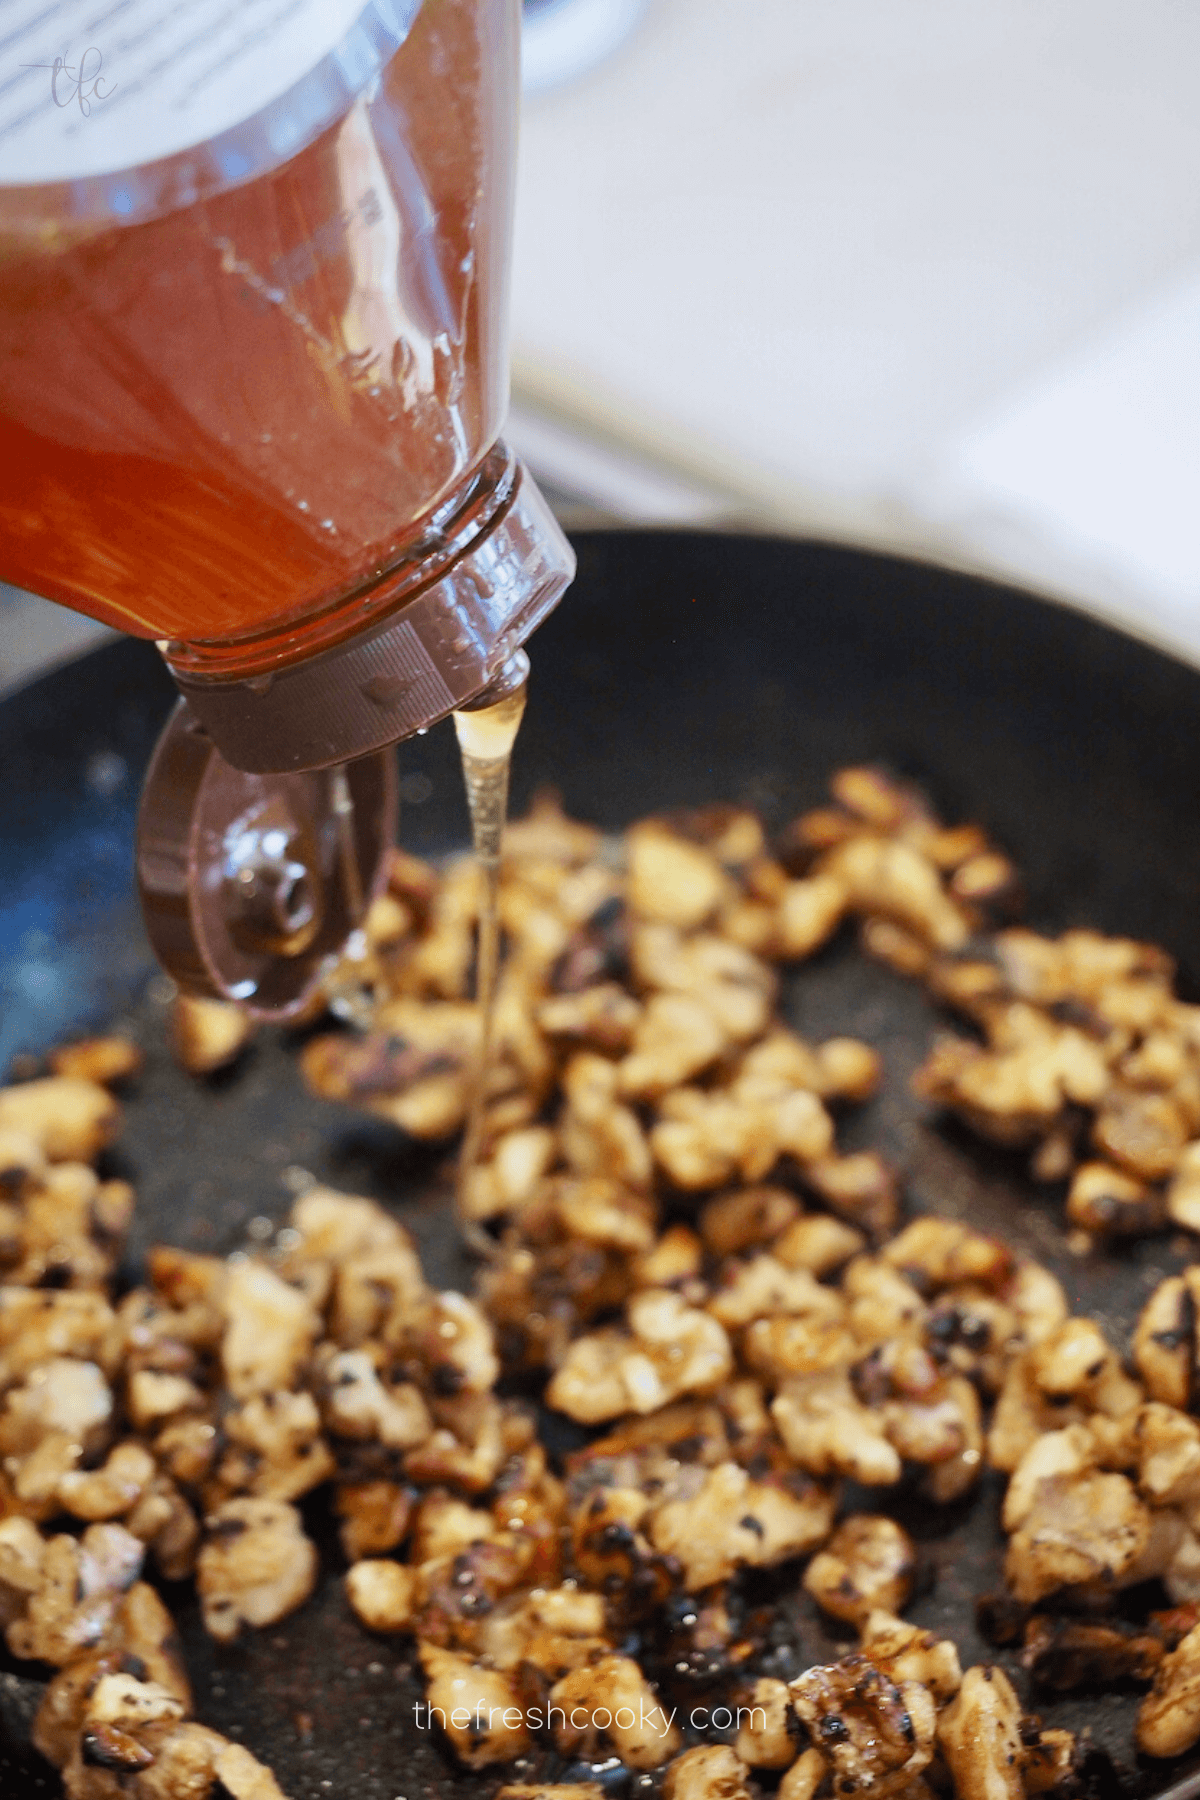 Walnuts in pan with honey drizzling in.